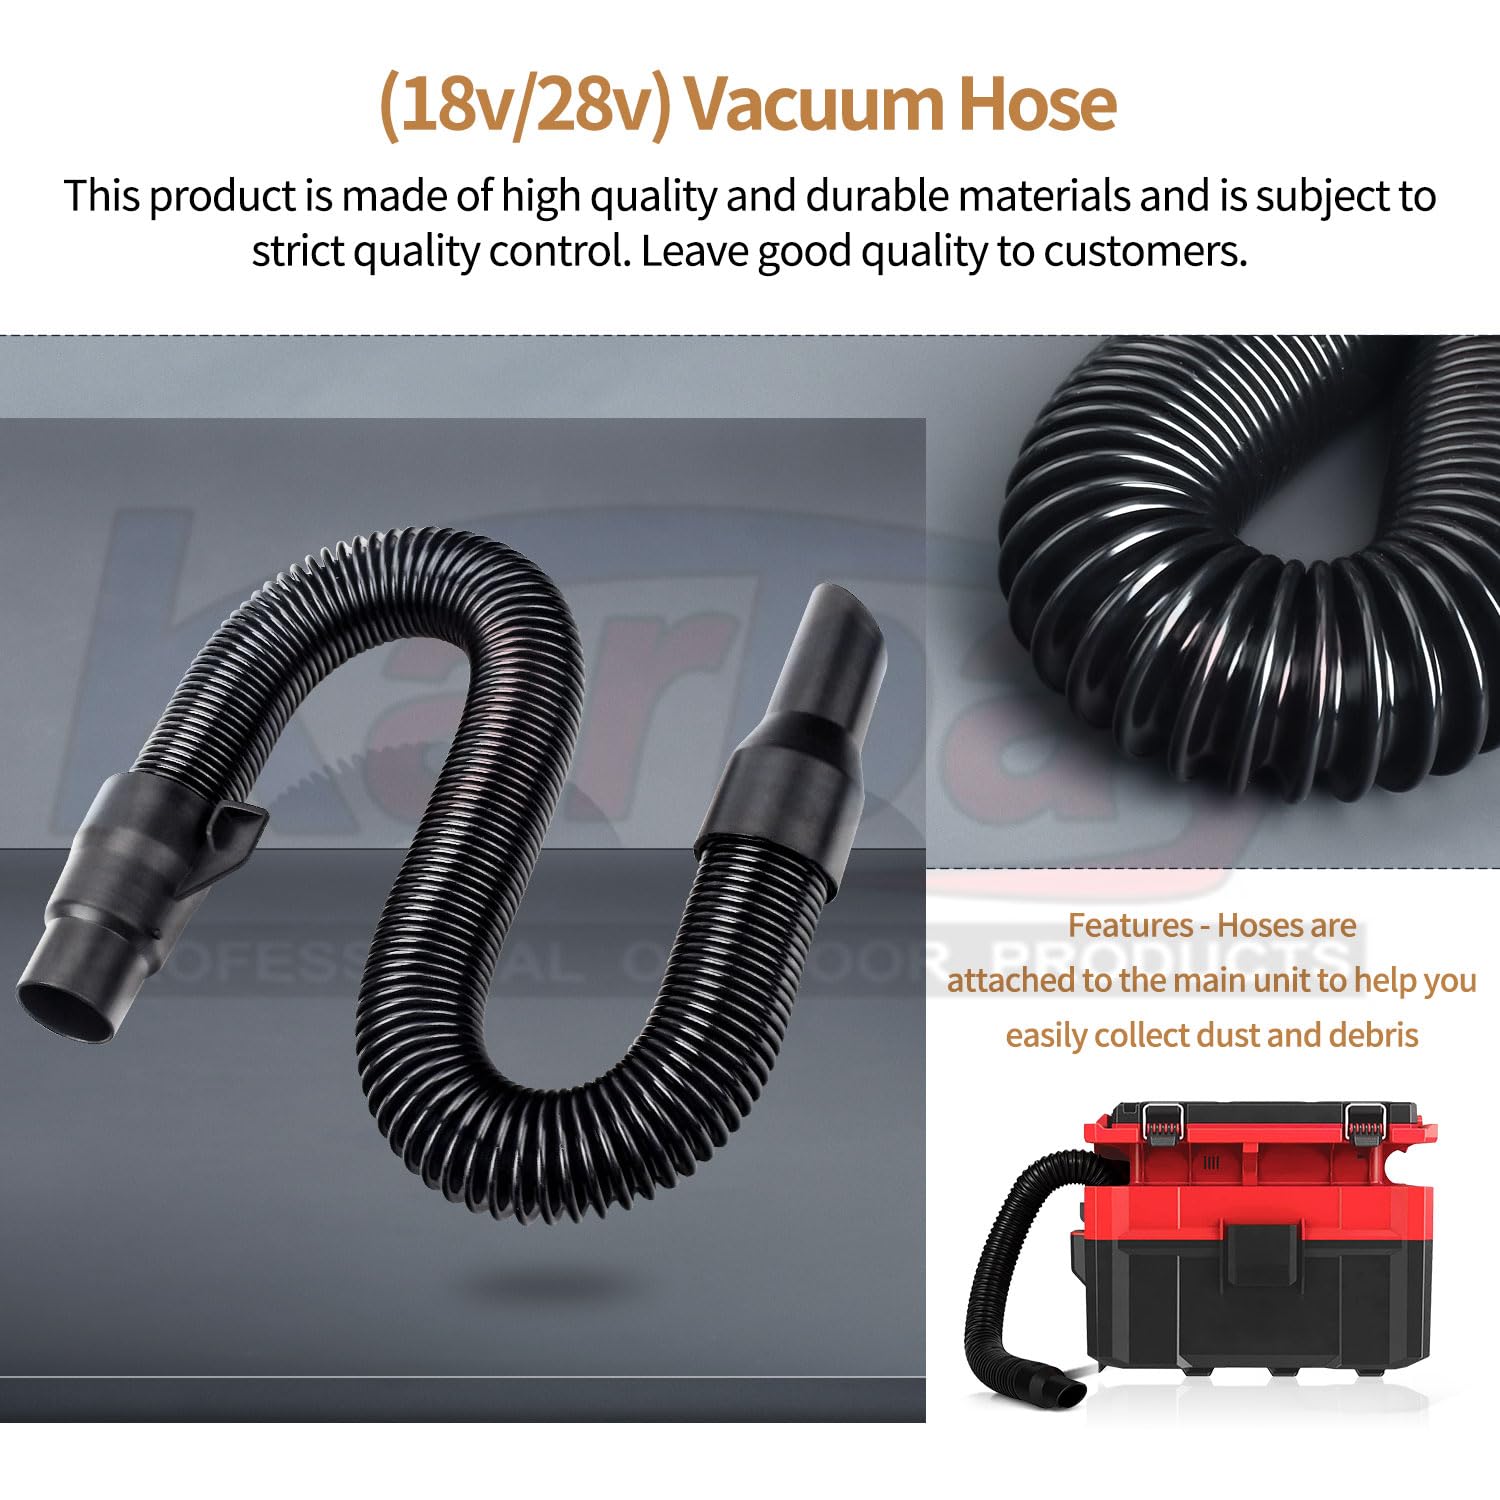 14-37-0105 18v/28v Wet/Dry Vac Hose Assembly Compatible with Milwaukee 0880-20 Rev-B Vacuum, Also Fits 0780-20 0970-20, use to pick up dust and debris - Fits Inside Hose Storage Vacuum